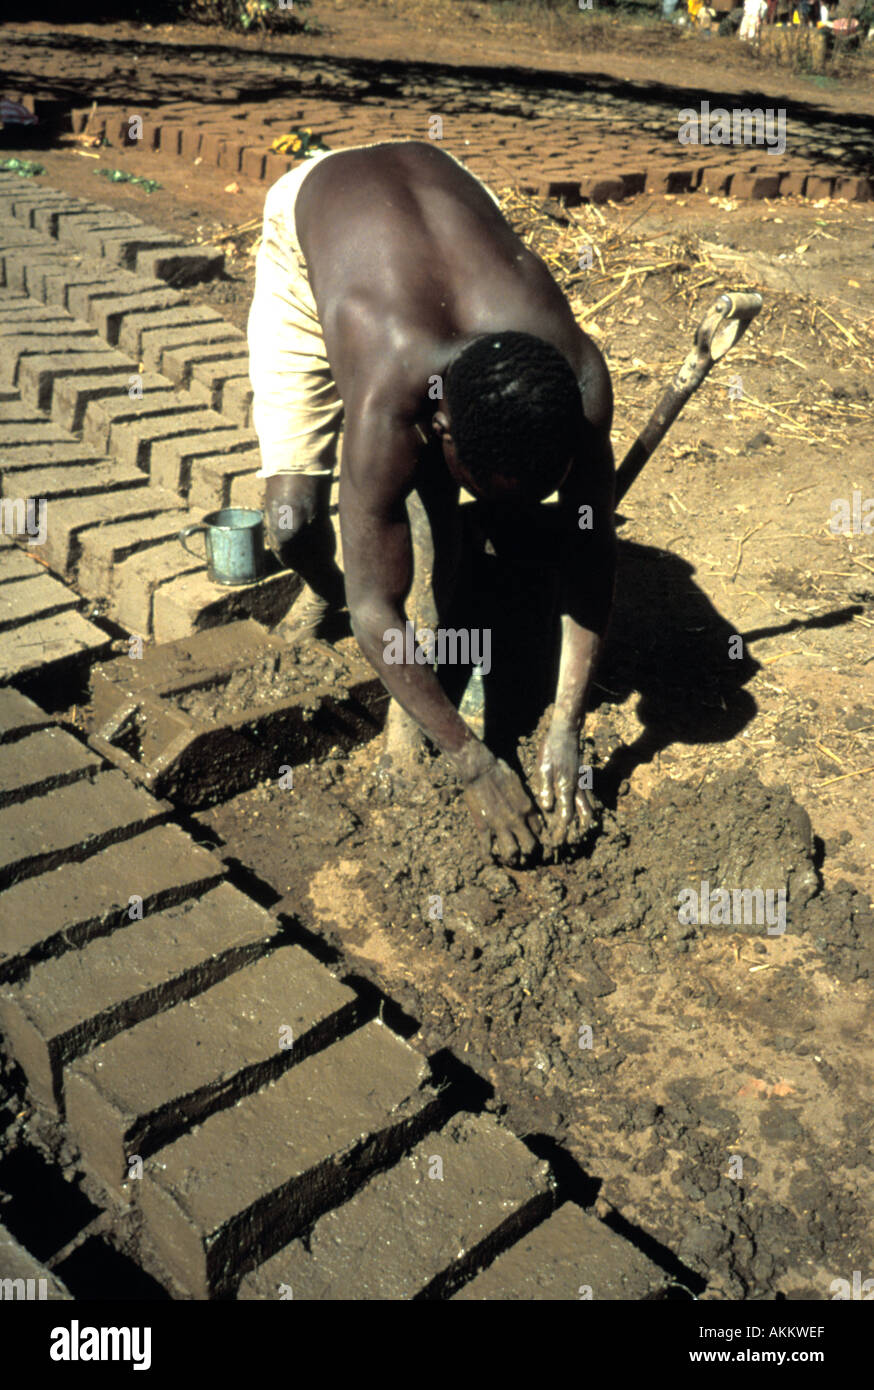 Black african man making adobe bricks for housing in Mozambique Africa Stock Photo